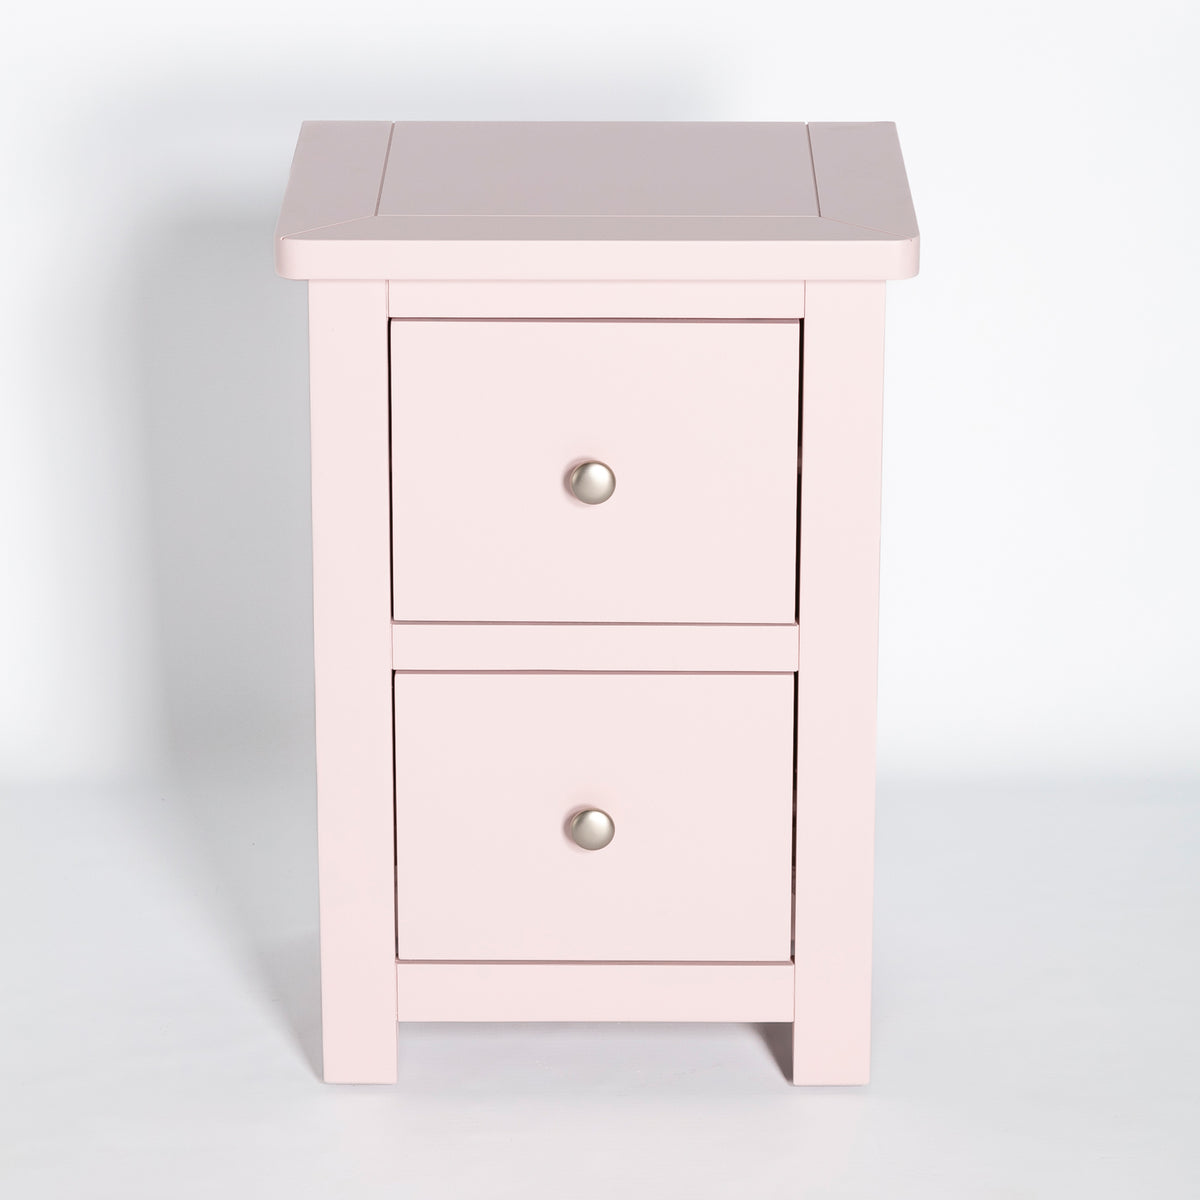 P 8002 Pink Bedside Table Cabinet Solid Wood Fully Assembled 2drw Simply Bedsides 3 ?v=1690303980&width=1200